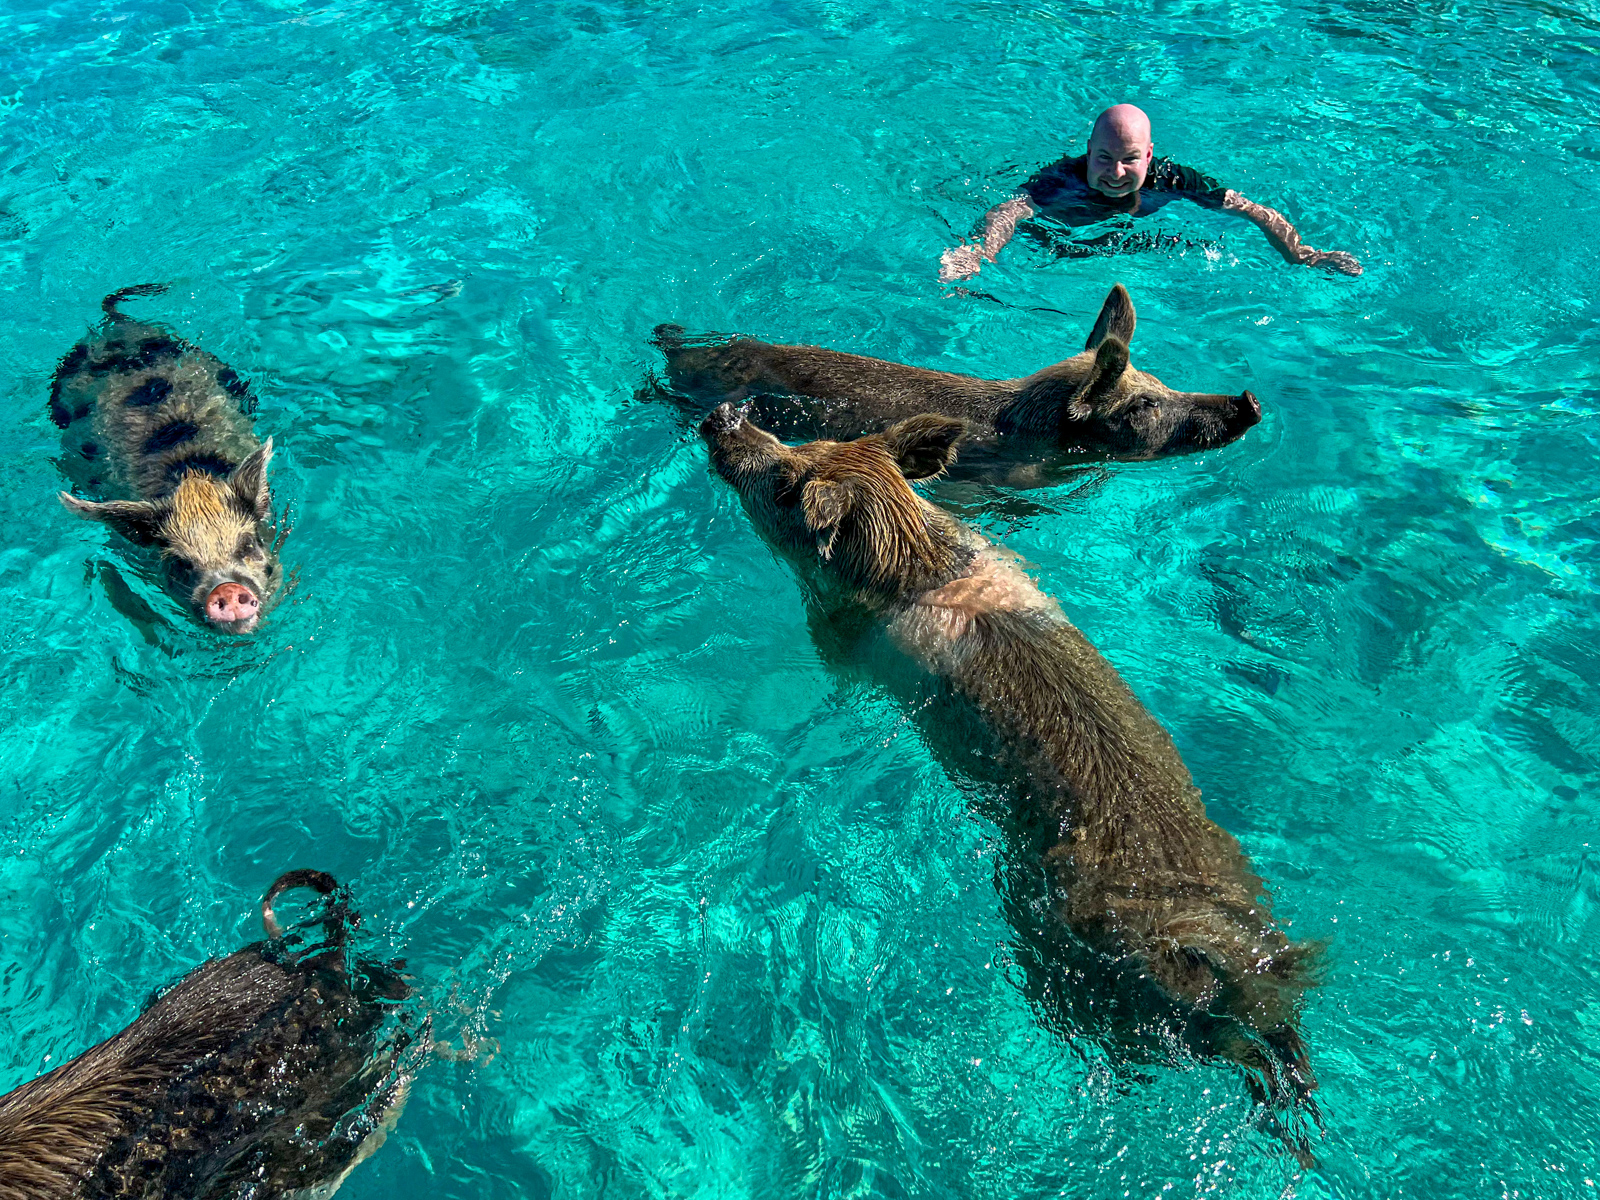 Dave swimming with pigs, one of the best things to do in Staniel Cay, The Bahamas